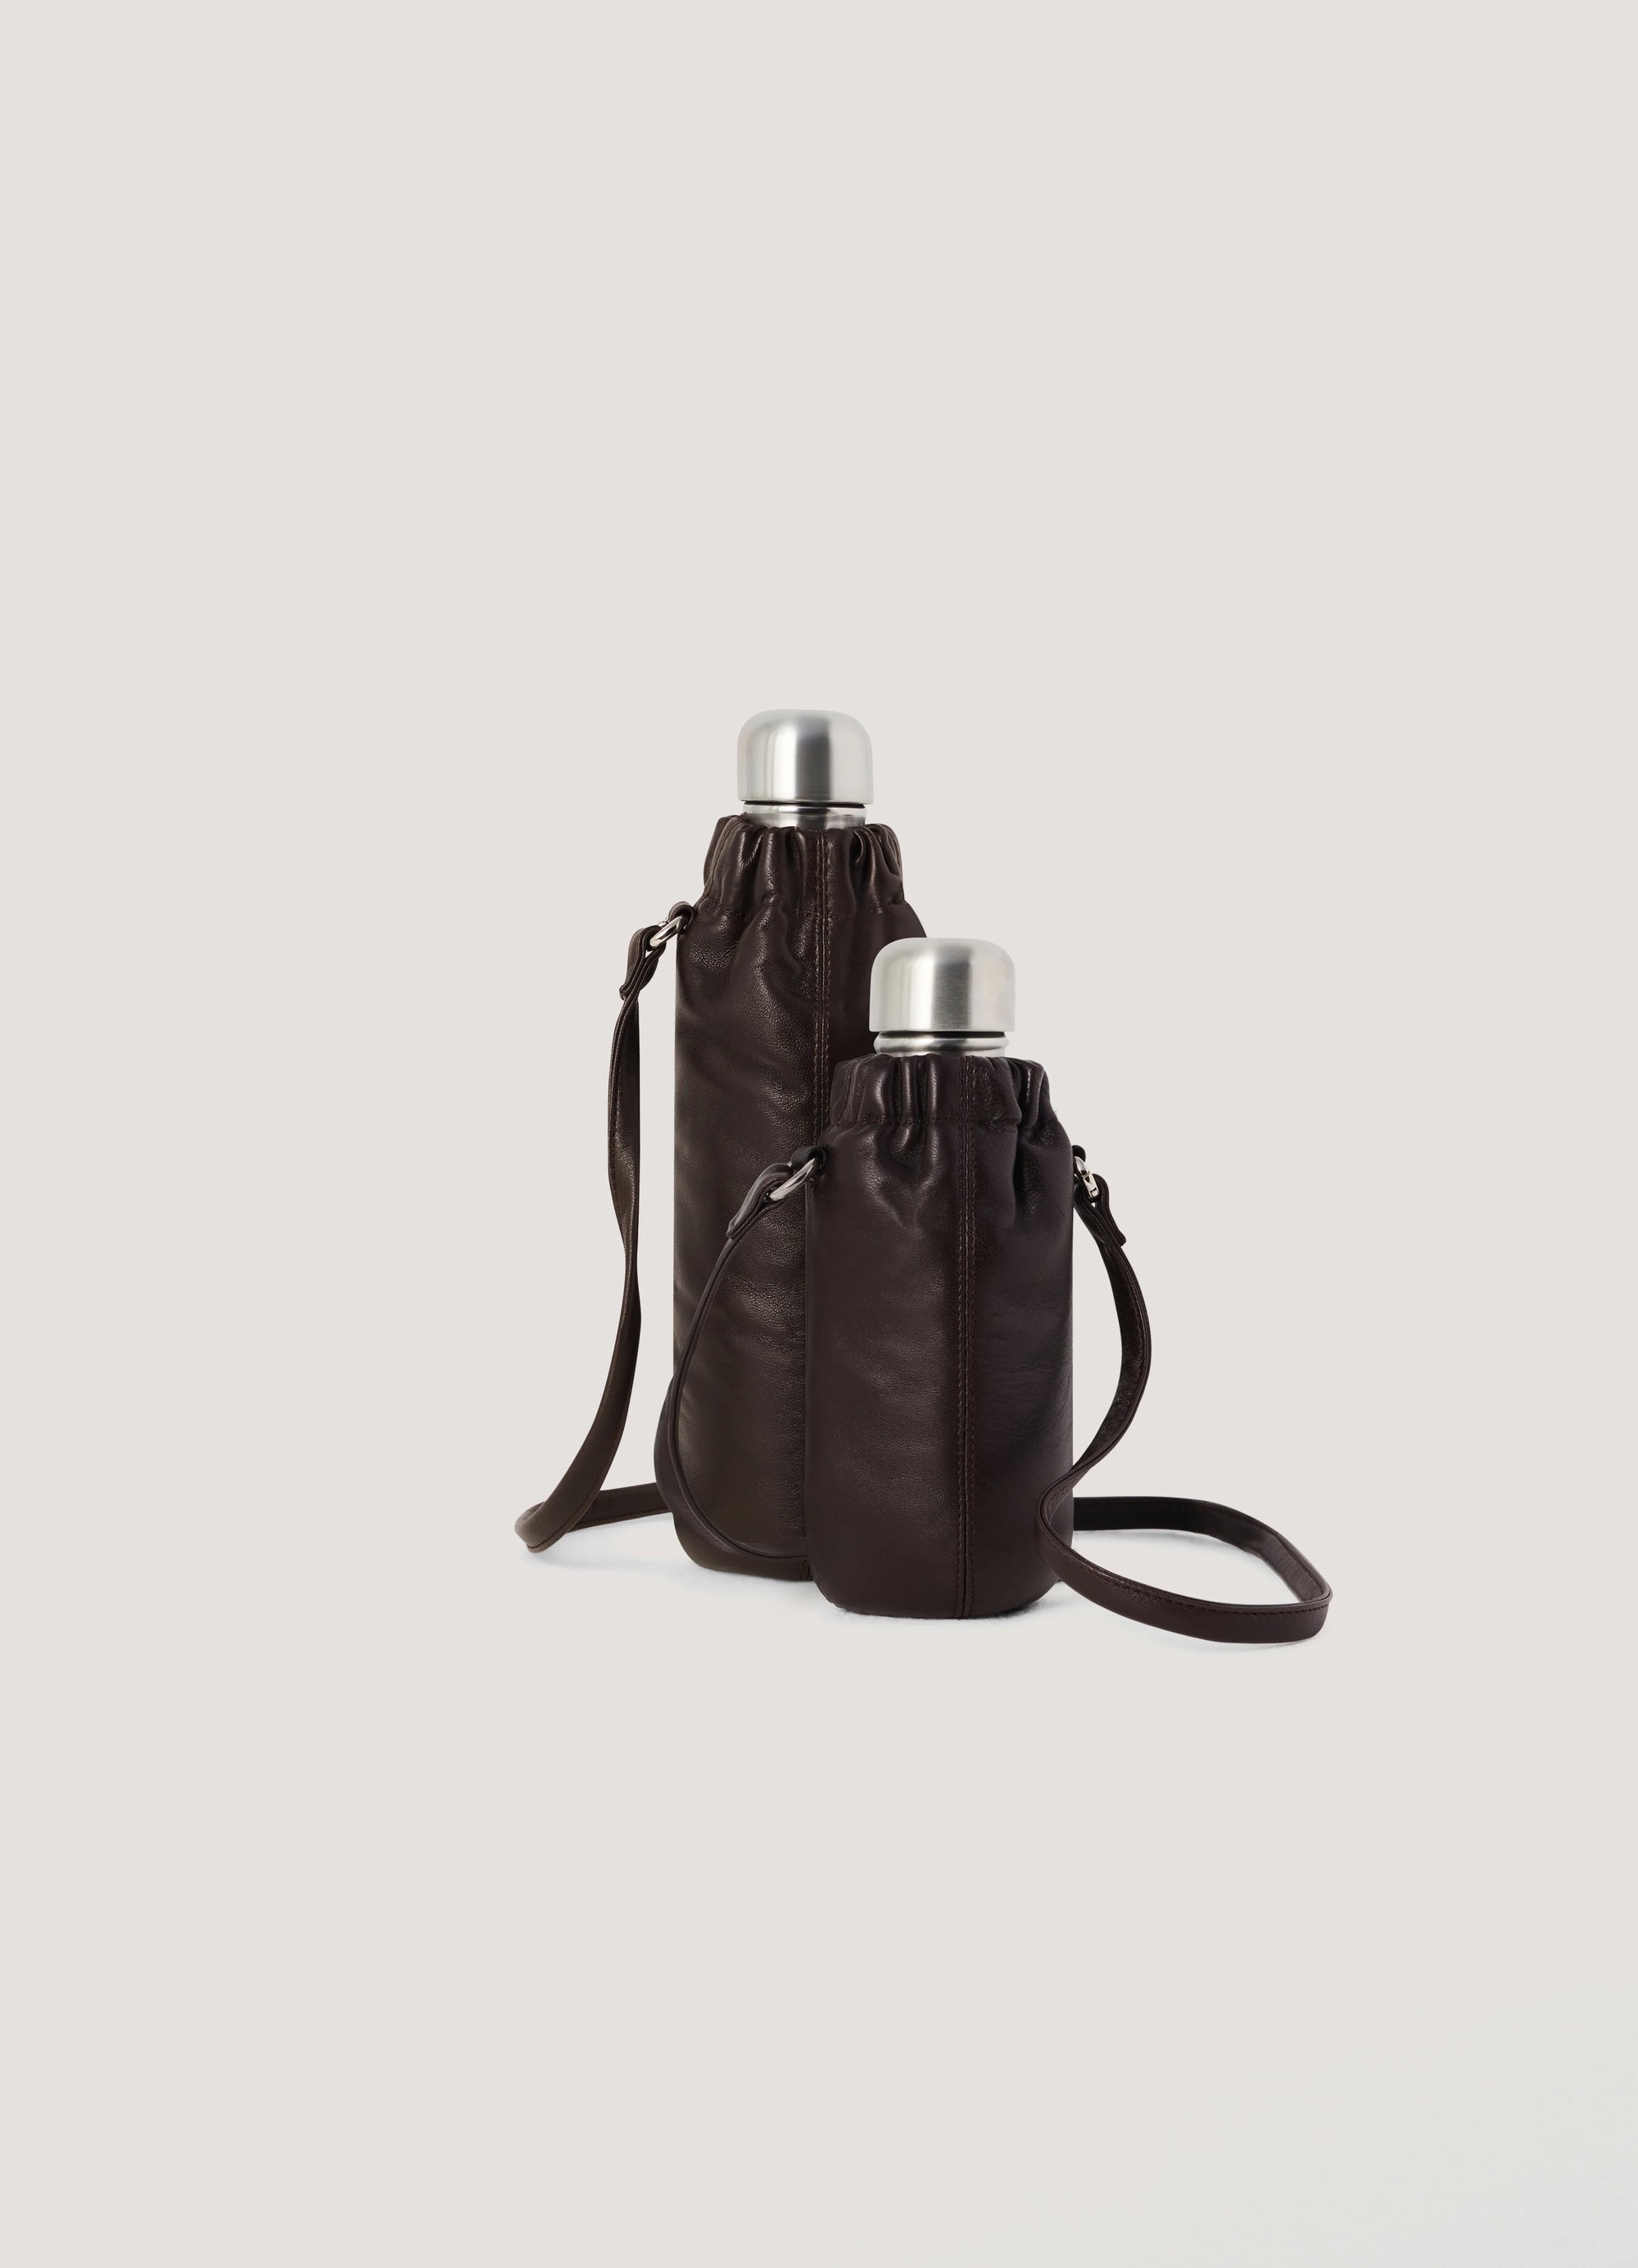 MEDIUM WATER BOTTLE-CARRIER
SOFT NAPPA LEATHER - 4